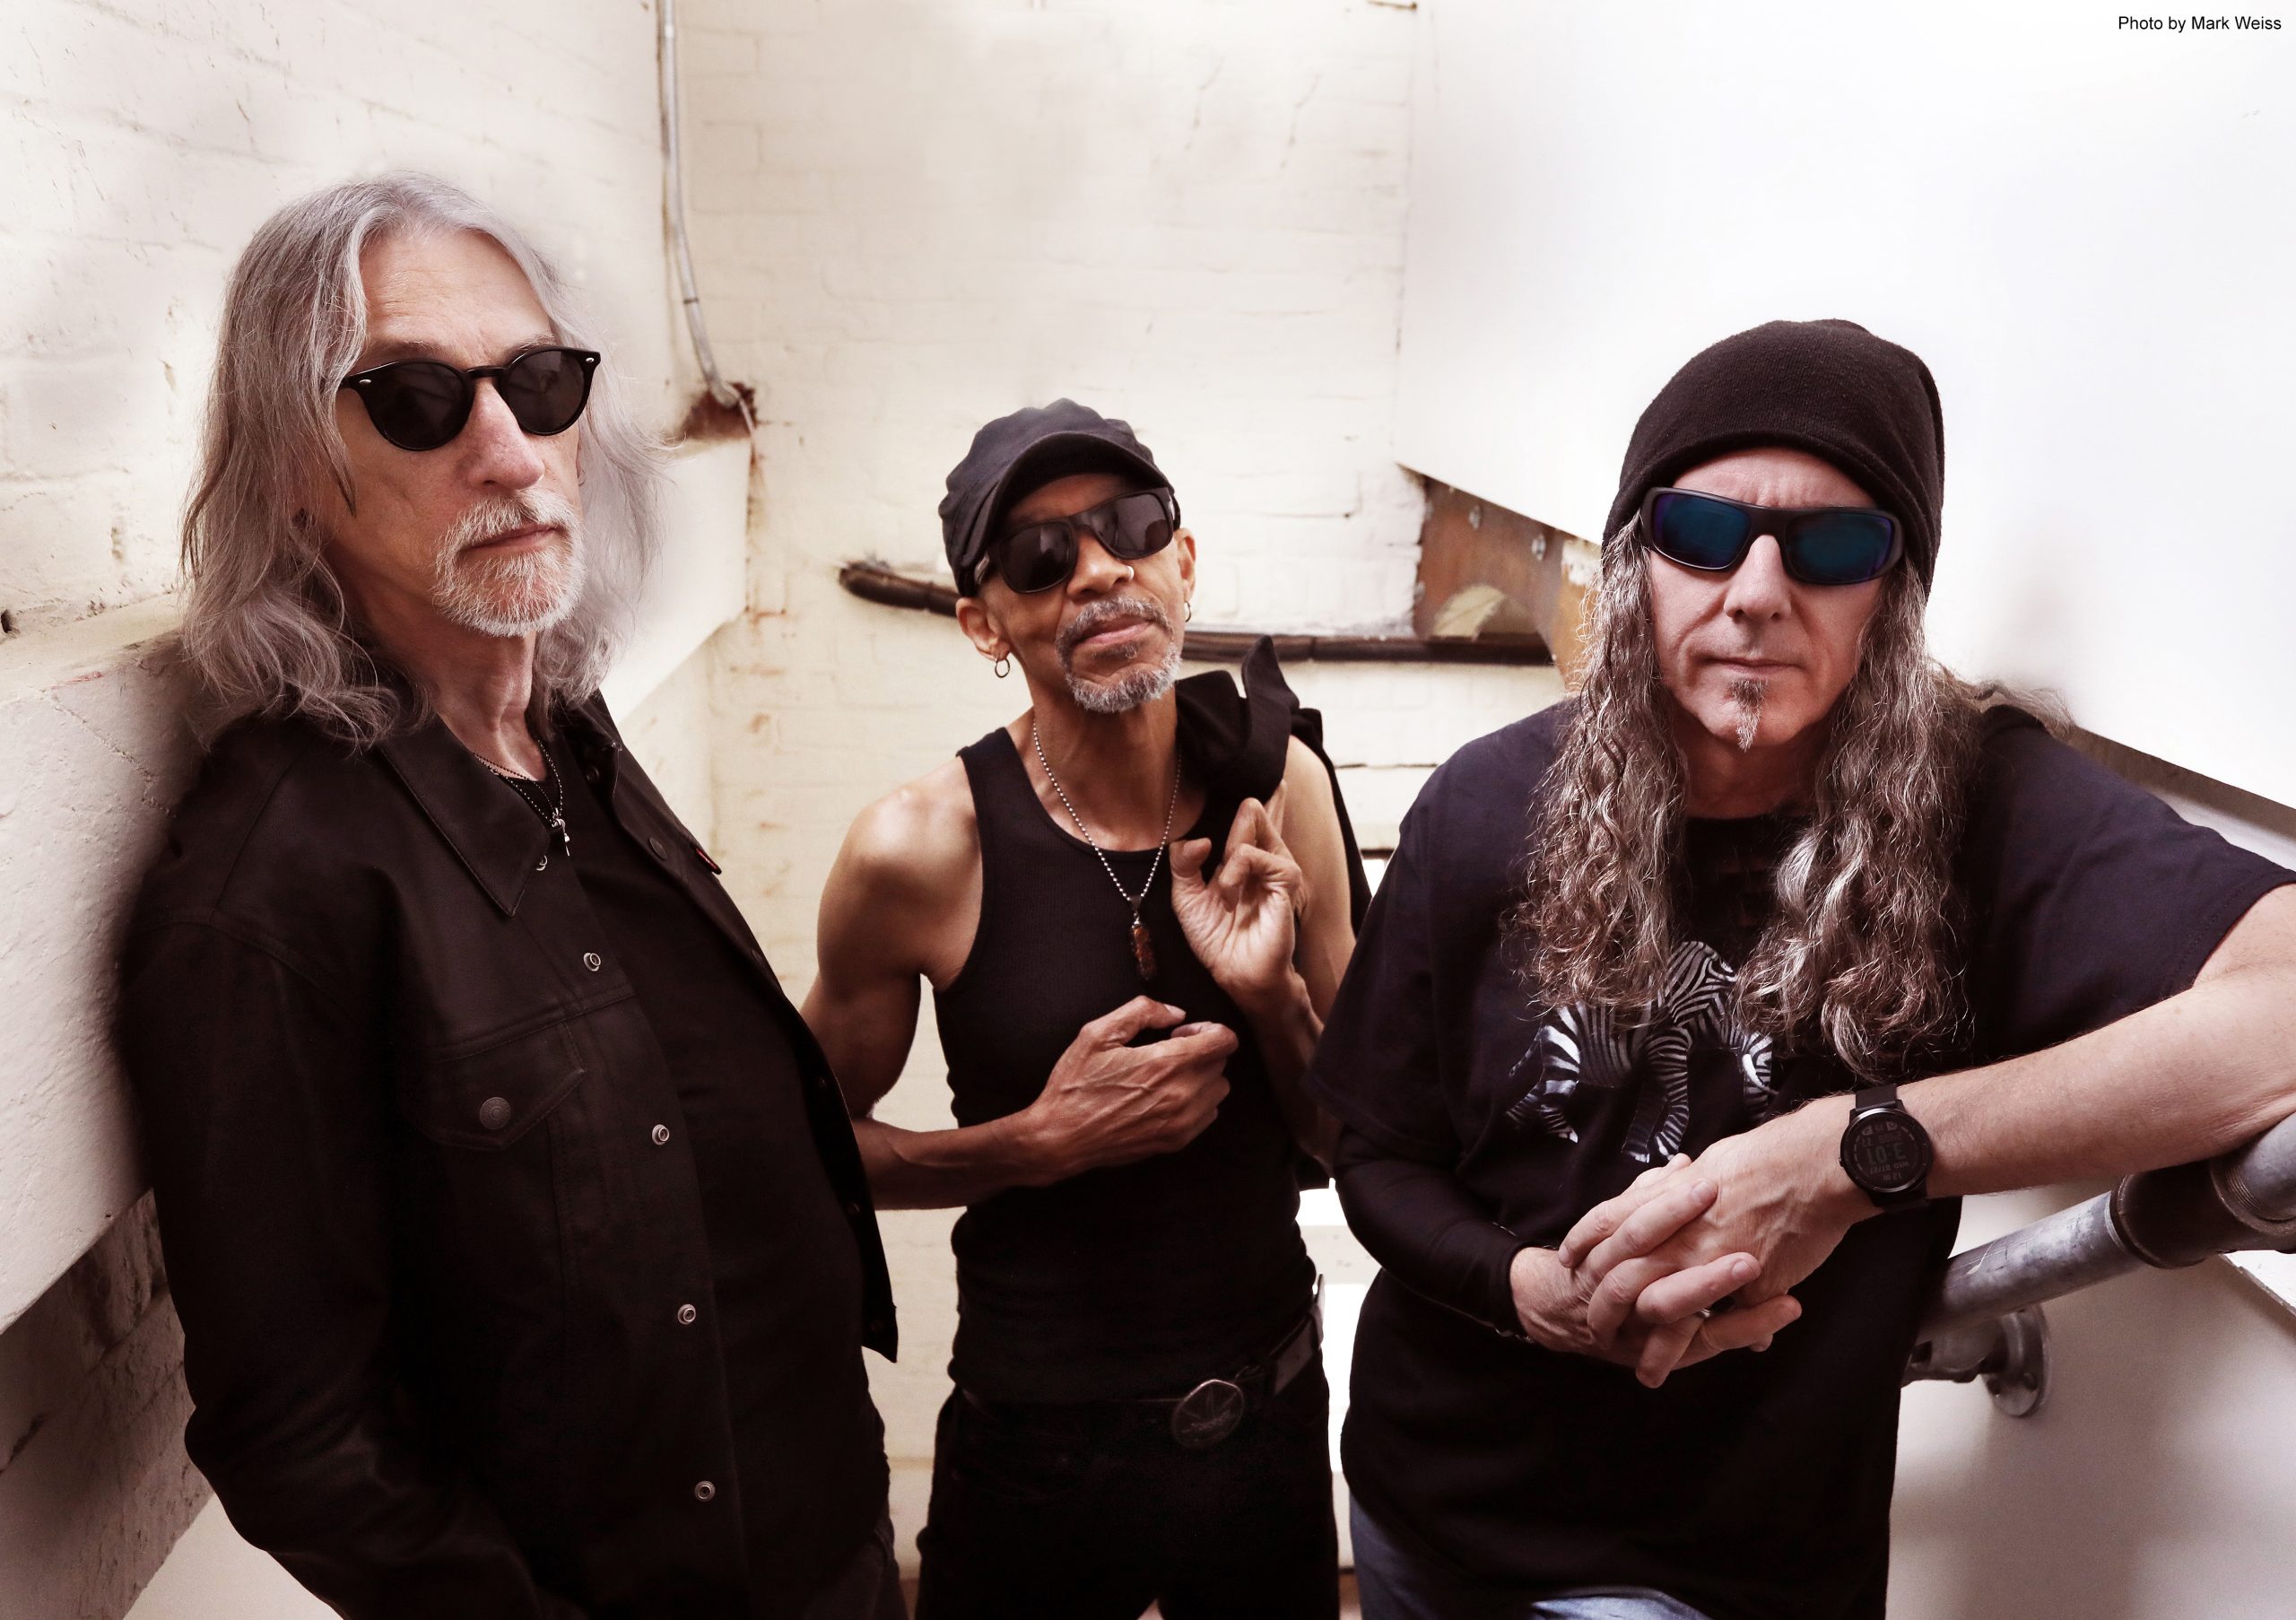 Three middle-aged male musicians standing together in a room with white walls, one wearing sunglasses and a black cap, another in aviator shades, and the third in a King's X band t-shirt.